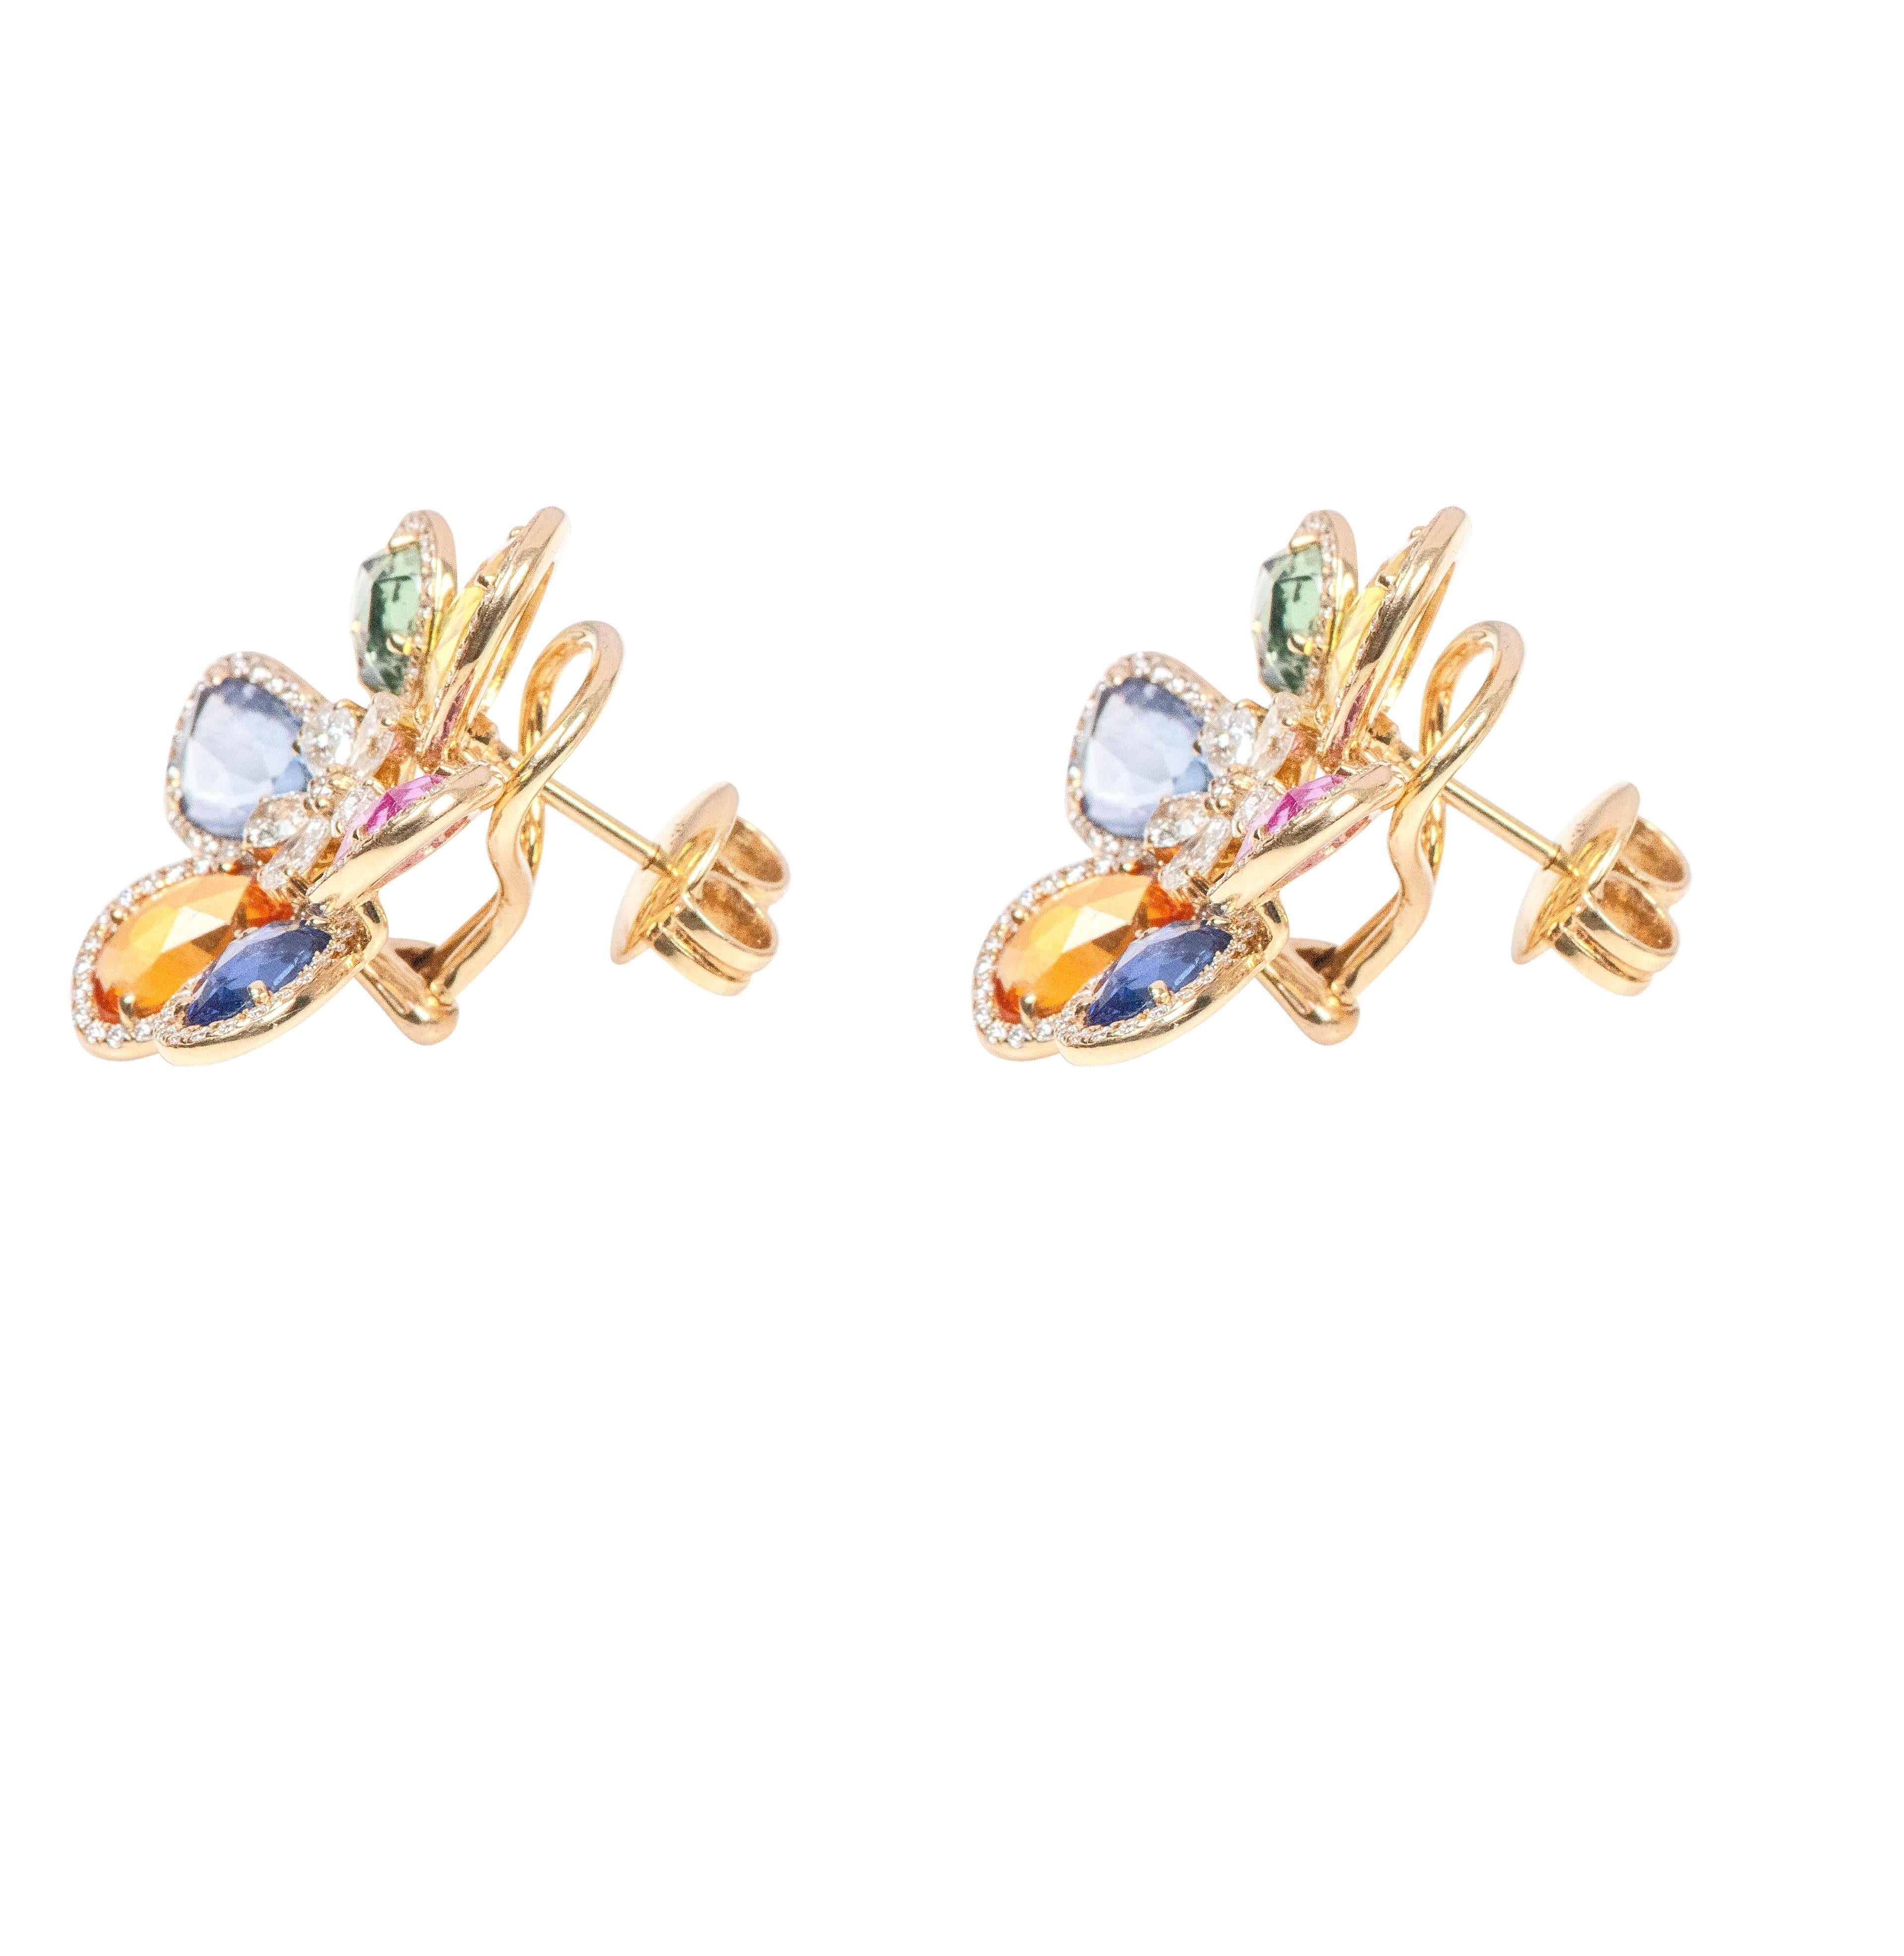 18 Karat Gold 12.51 Carat Diamond and Sapphire Flower Stud Earrings 

a perfect fusion of elegance and artistic curation. Each earring is a unique masterpiece, meticulously designed and crafted to showcase a captivating flower motif composed of